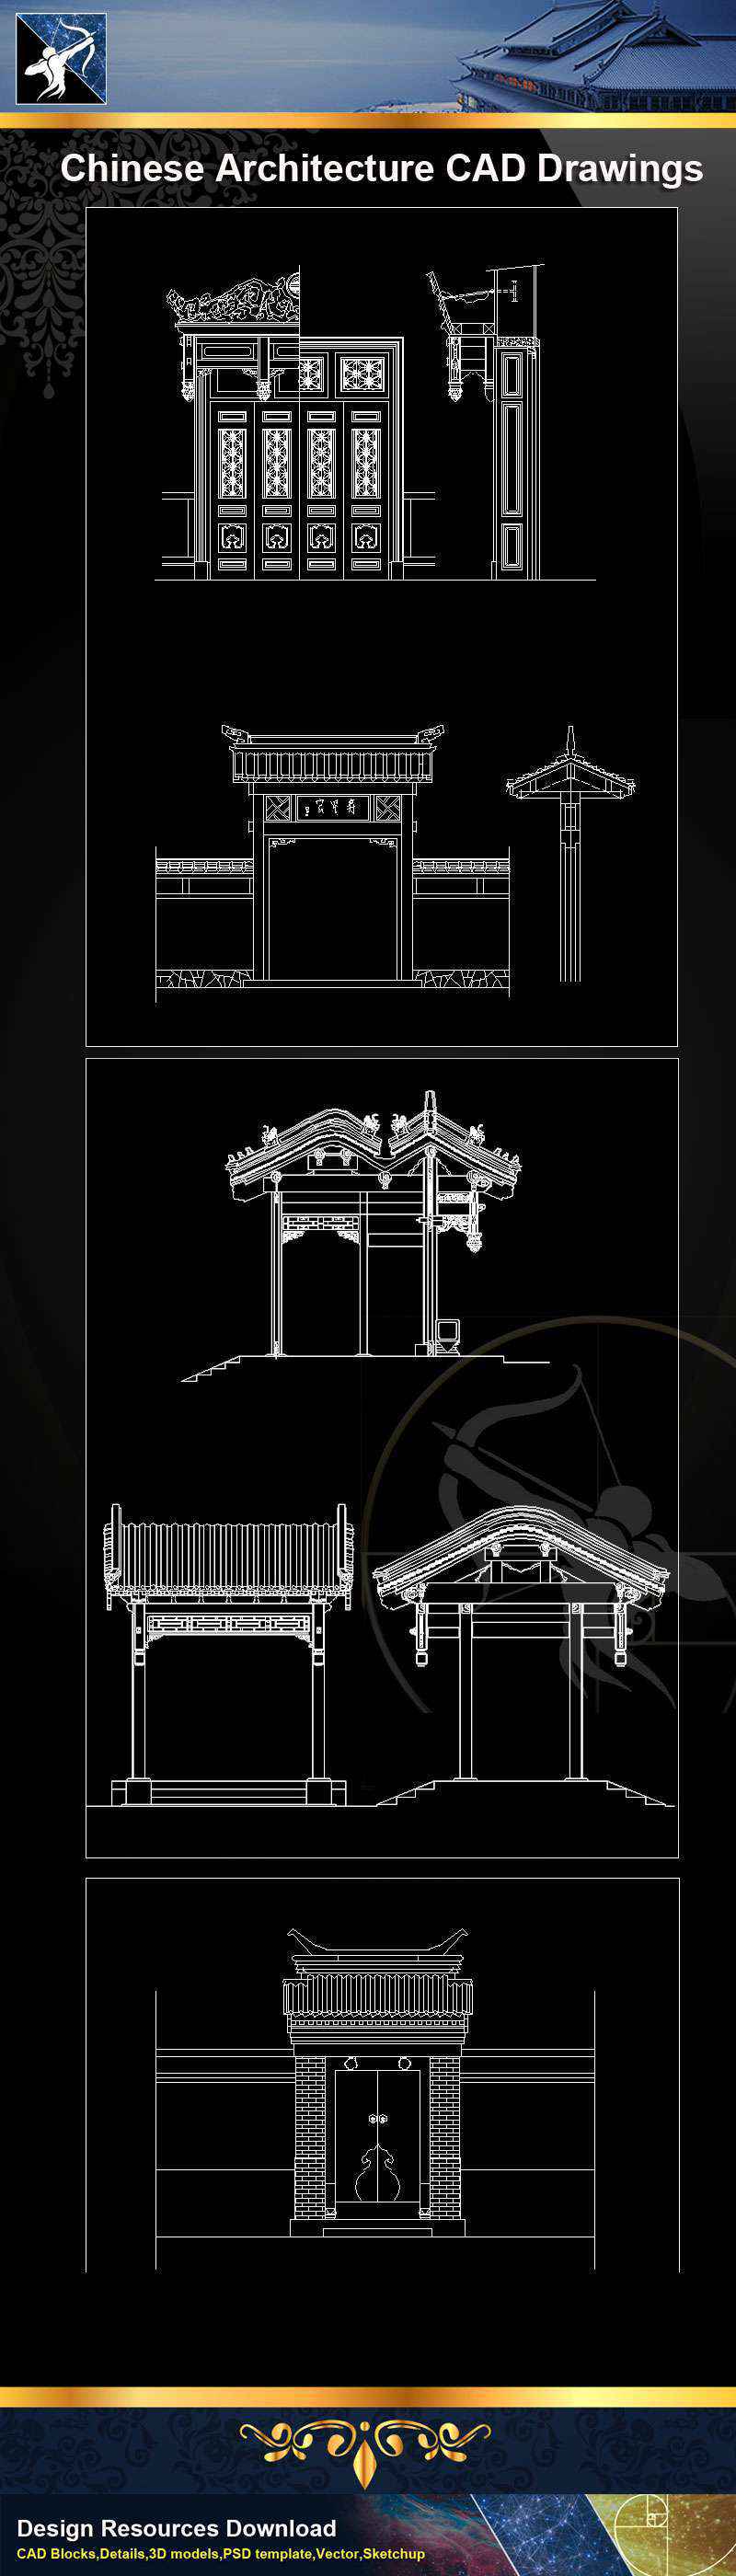 ★【Chinese Architecture CAD Drawings】@Autocad Blocks,Drawings,CAD Details,Elevation